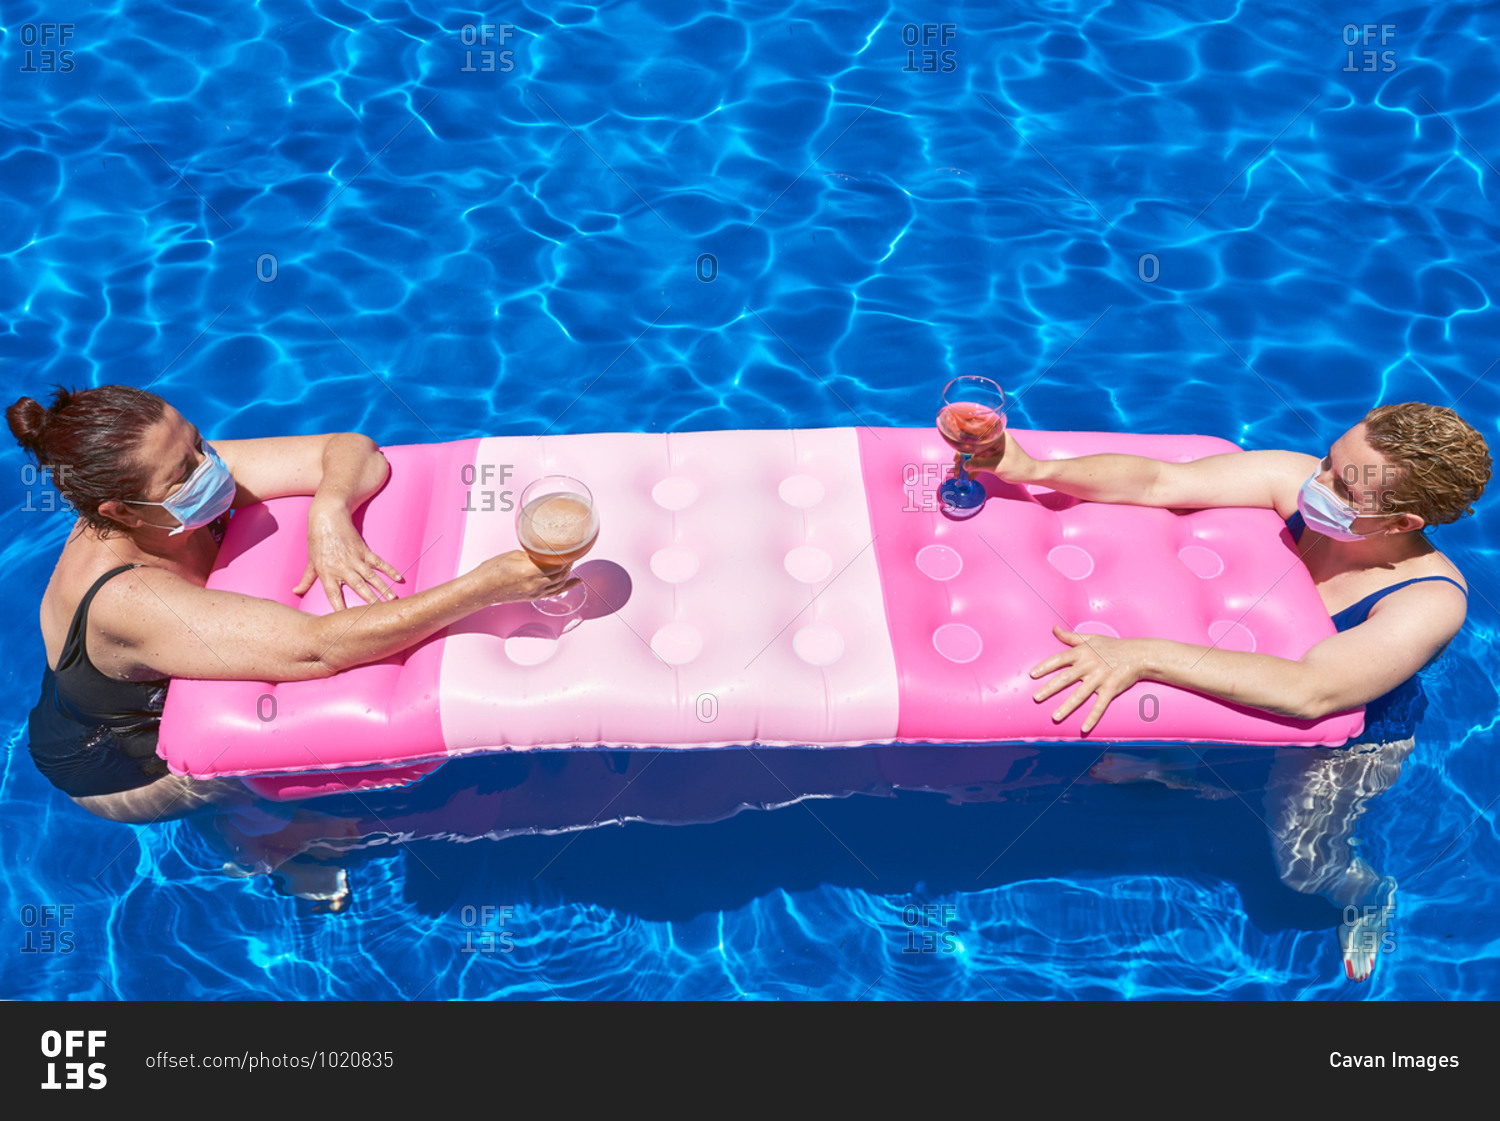 Two women bathe in a pool with a sanitary mask. they maintain the safety distance.